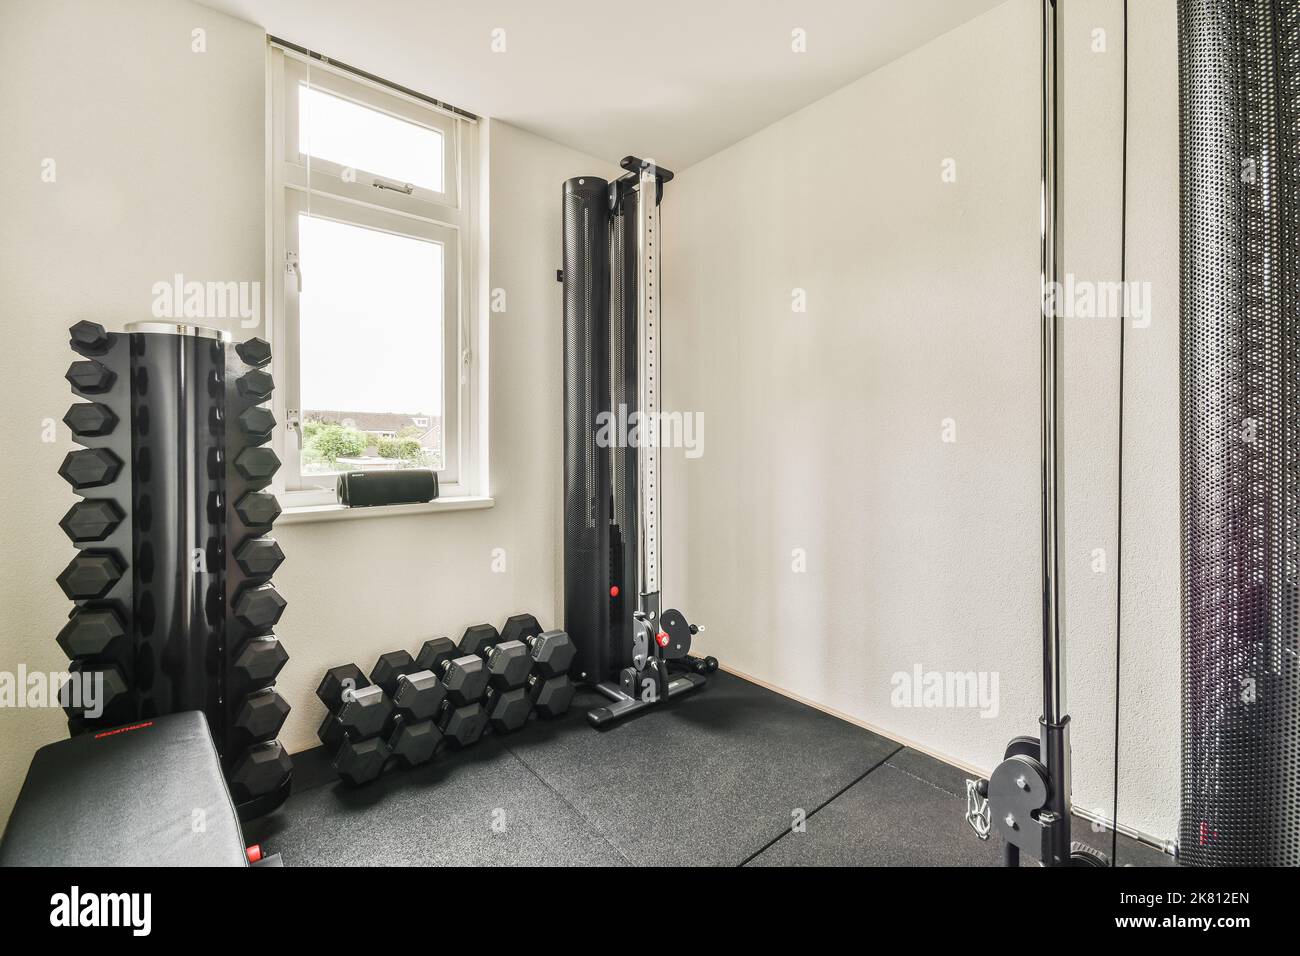 Home Gym Design on wooden floor near window in spacious light room at home Stock Photo